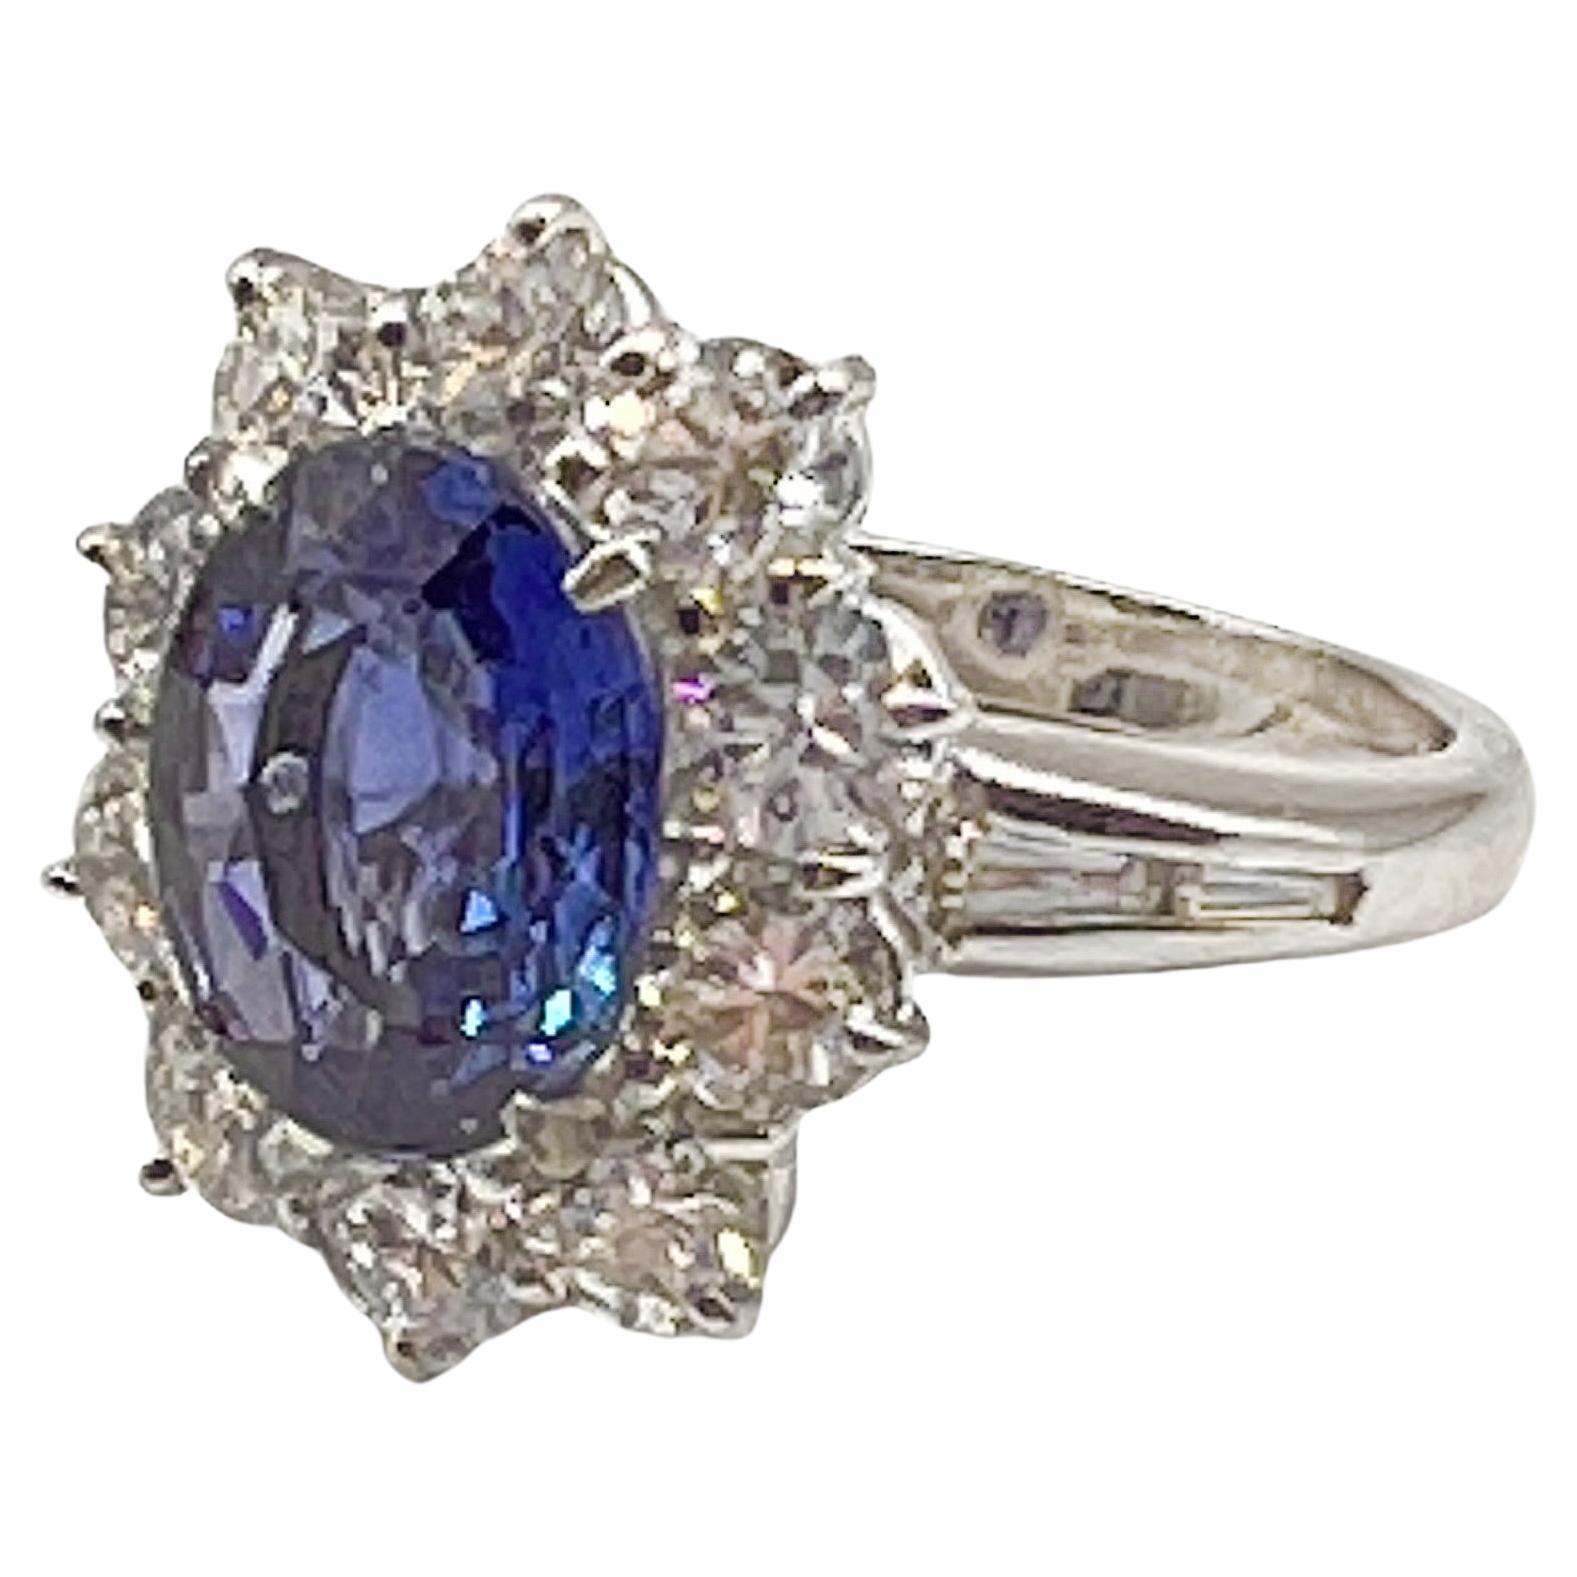 Beautiful cornflower blue natural sapphire weighing 3.25 carats set in four-prongs in a handmade platinum mounting.  The sapphire is surrounded by ten near-colorless round brilliant-cut diamonds with four baguette-cut diamonds inset on the top sides